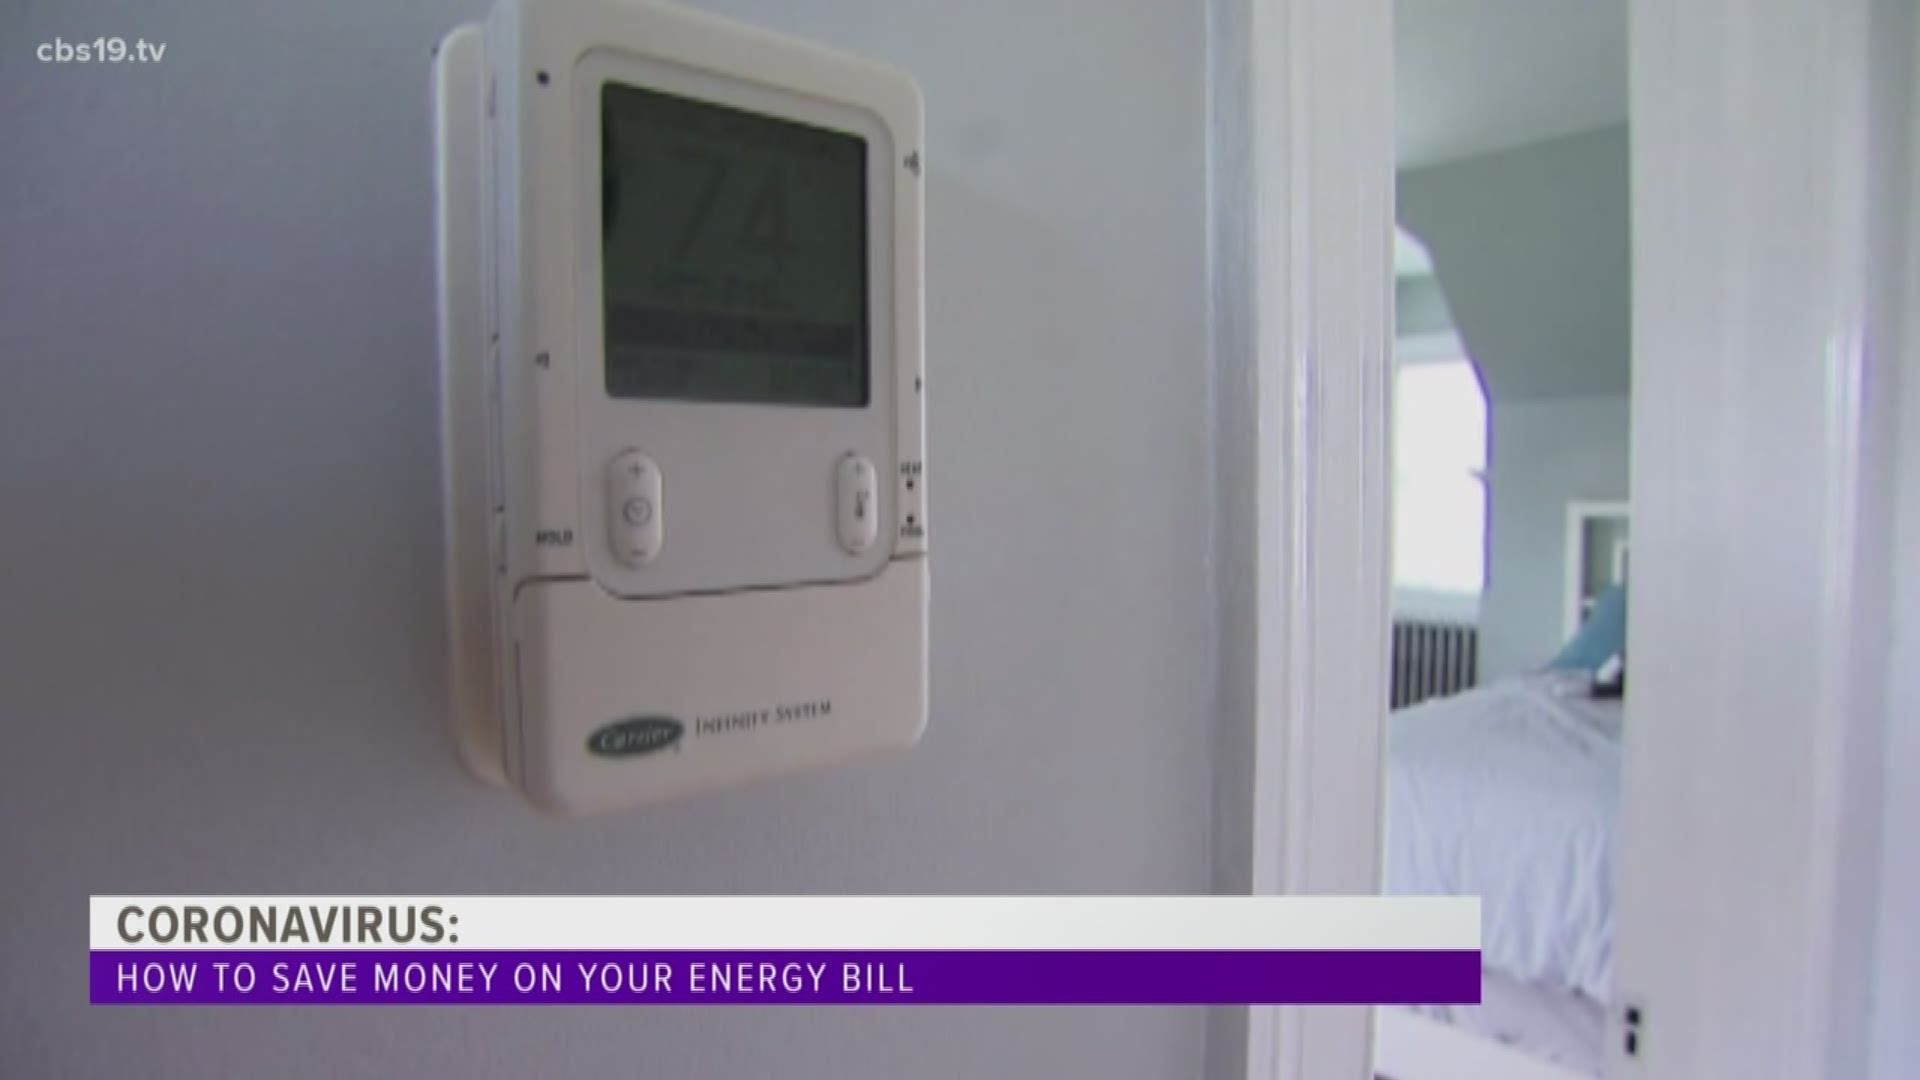 More time at home means more energy being used around the house. Here are some tips to cut down on your energy bill.